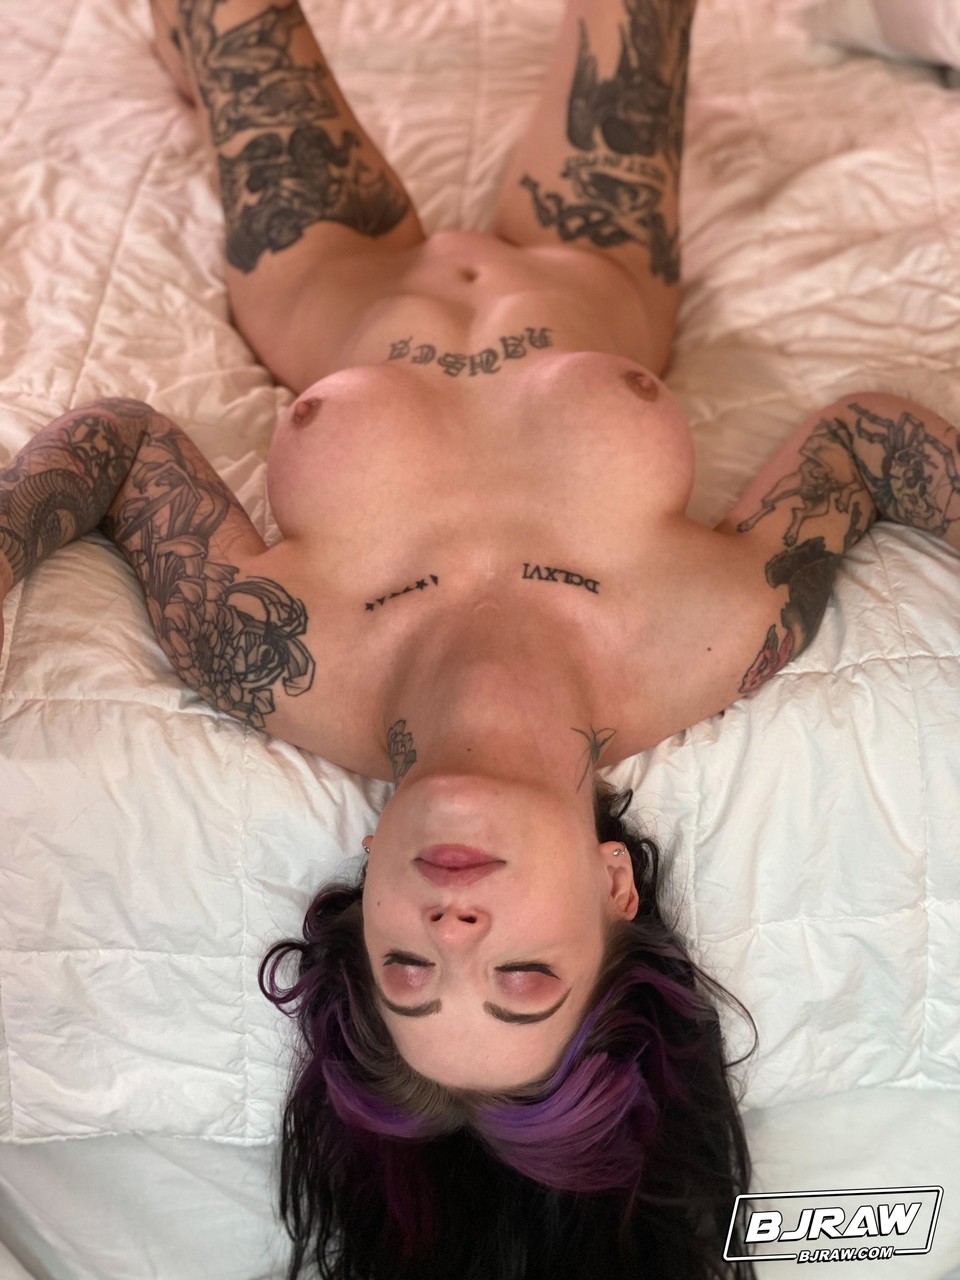 Brunette babe with tattoos Charlotte Sartre takes a dick in her mouth porno fotky #424649935 | BJ Raw Pics, Charlotte Sartre, Tattoo, mobilní porno